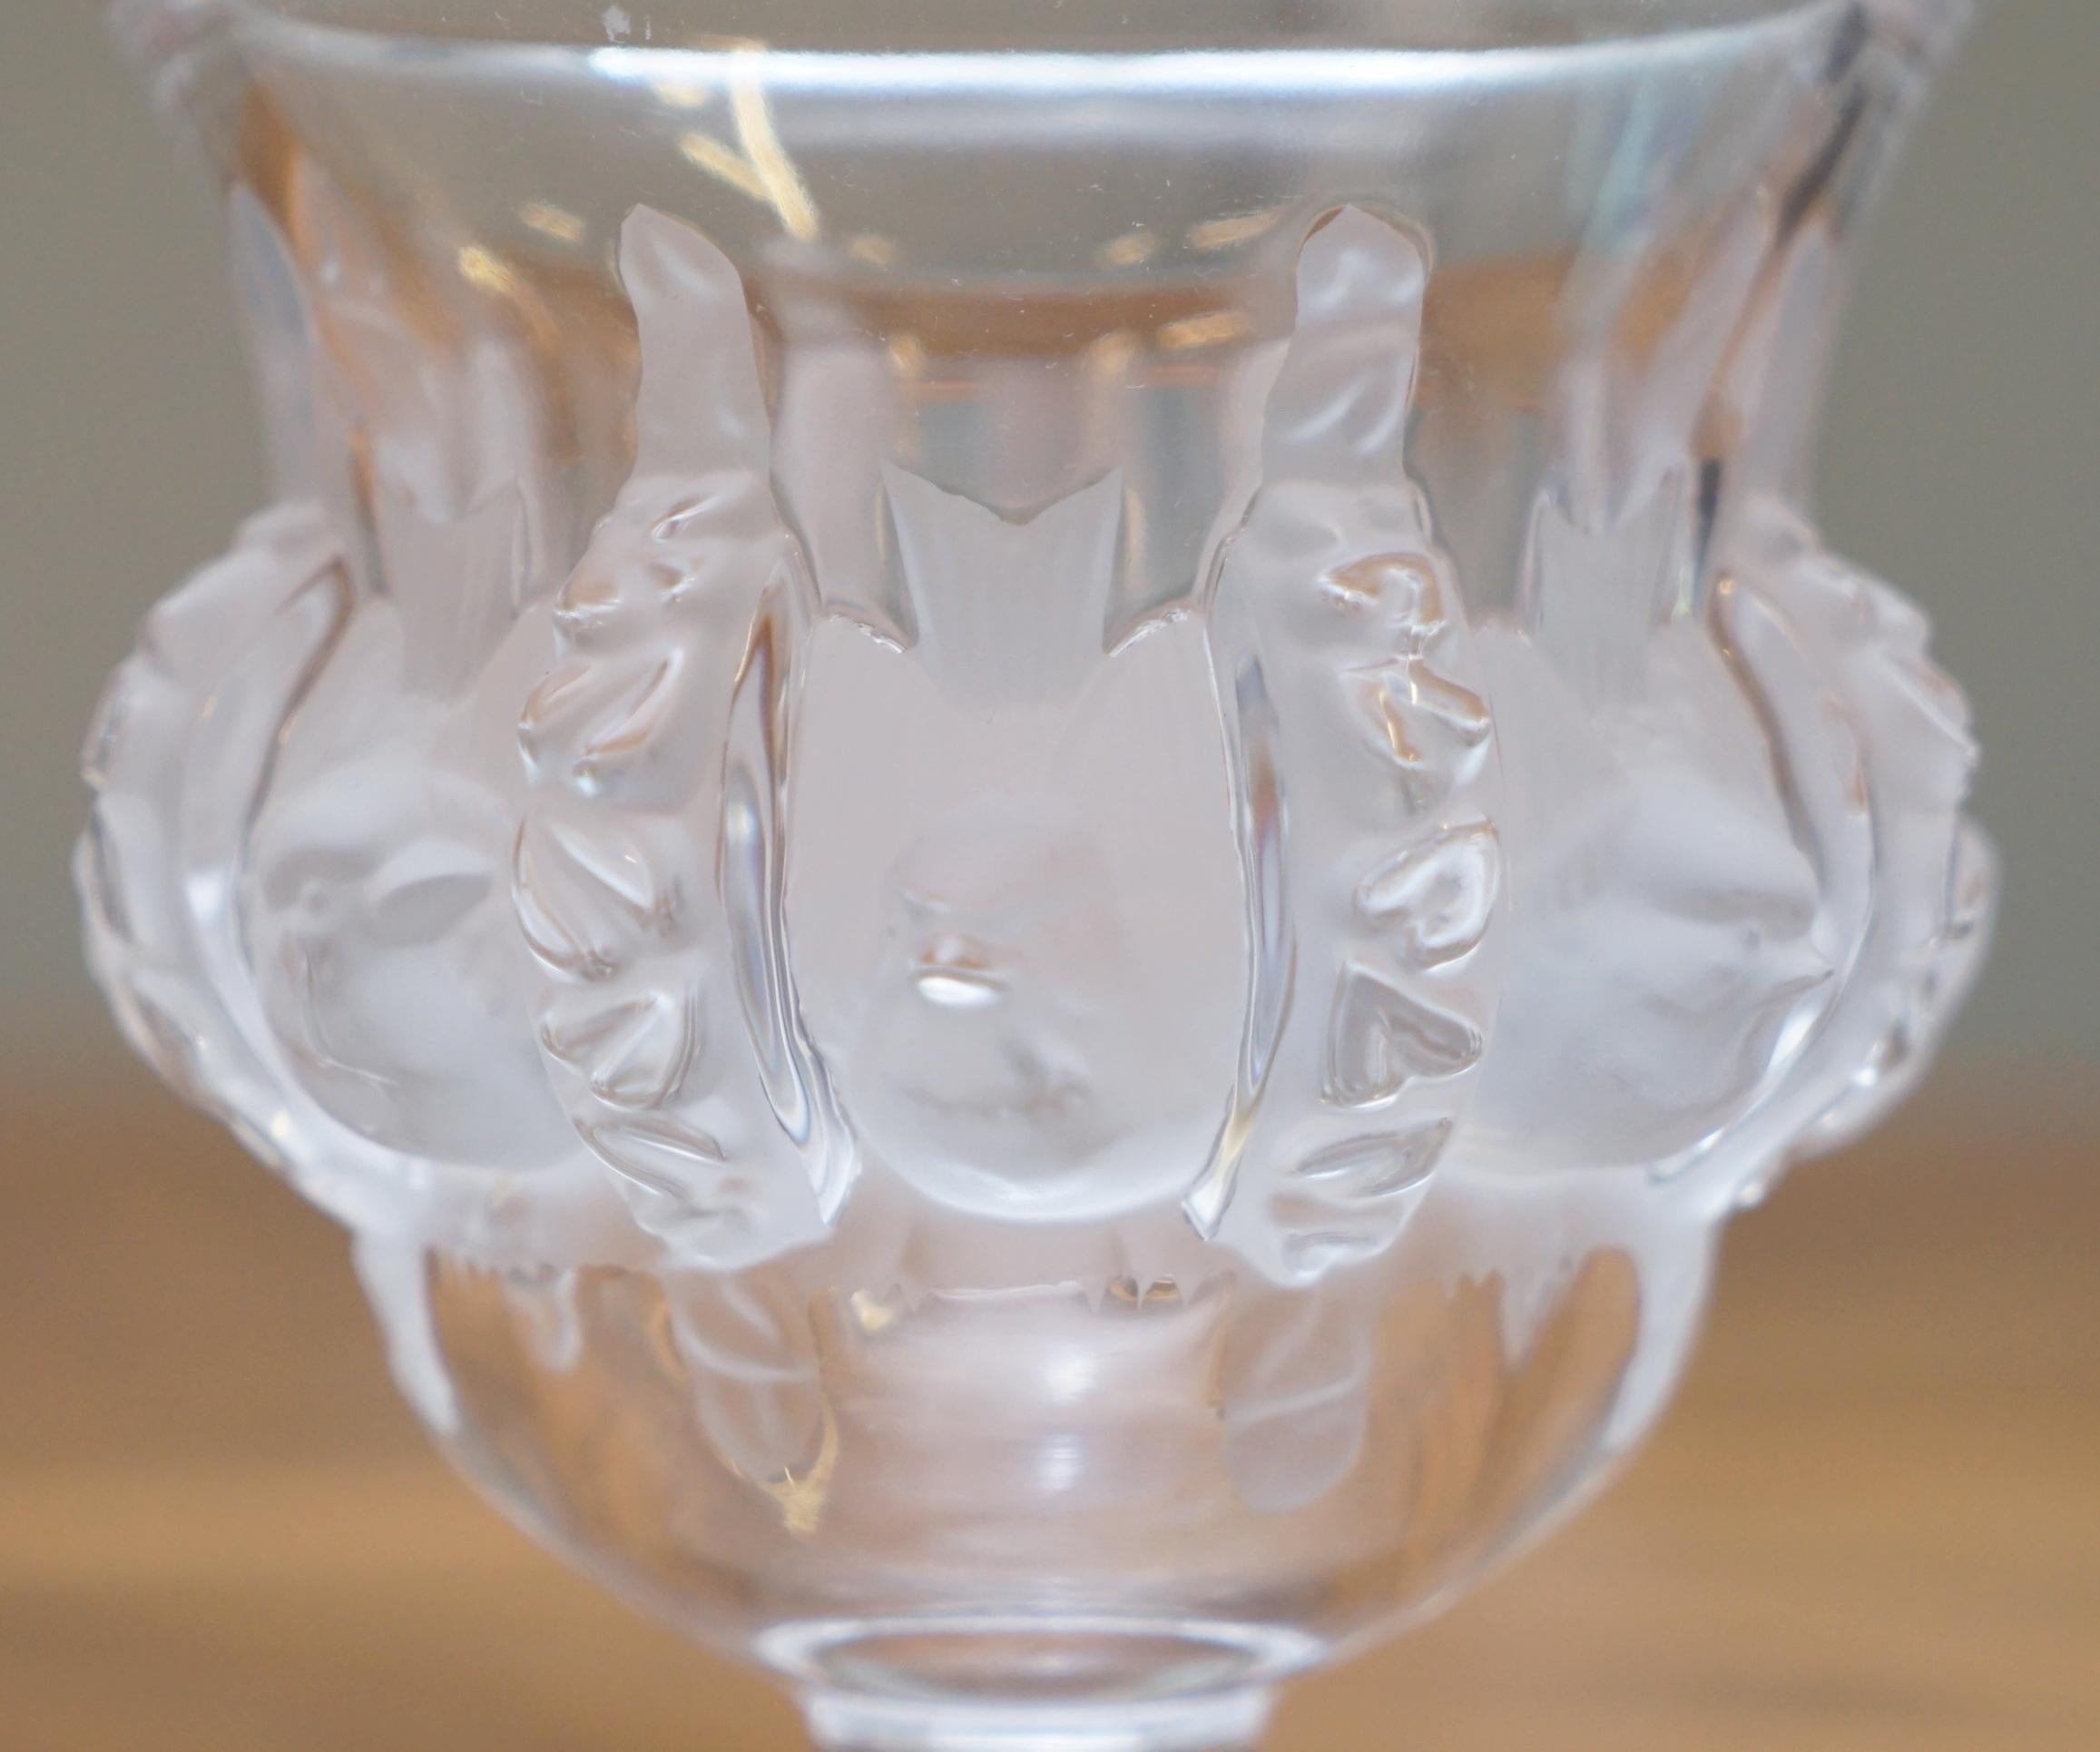 French Stunning Lalique Crystal Dampierre Bird Vase Designed in 1948 by Marc Lalique